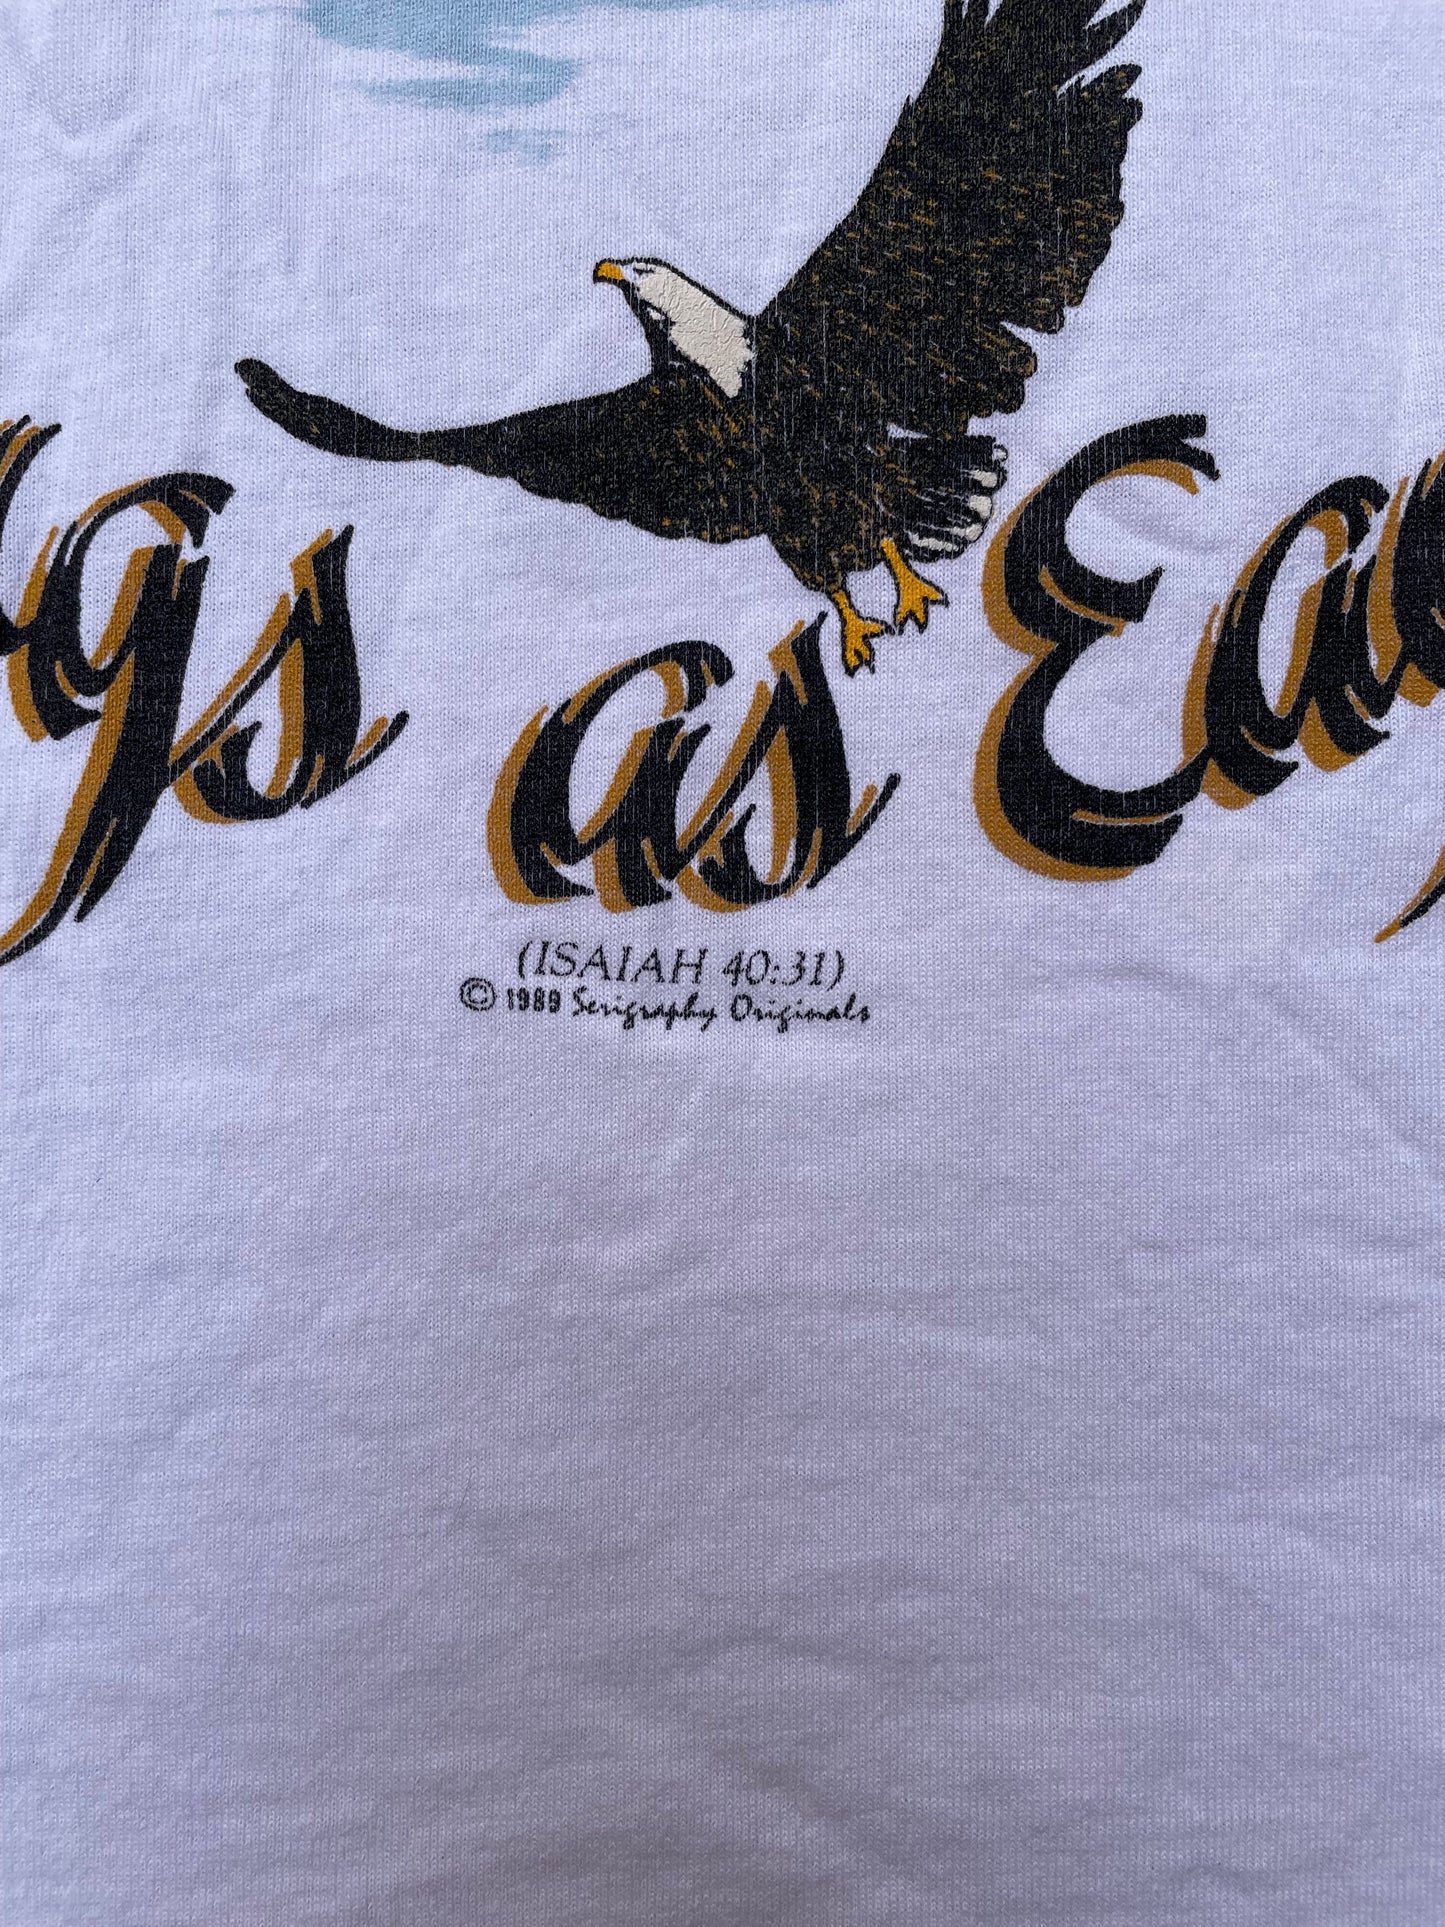 1989 'Wings as Eagles' Isaiah 40:31 Bible Verse Religious Graphic T-Shirt - L